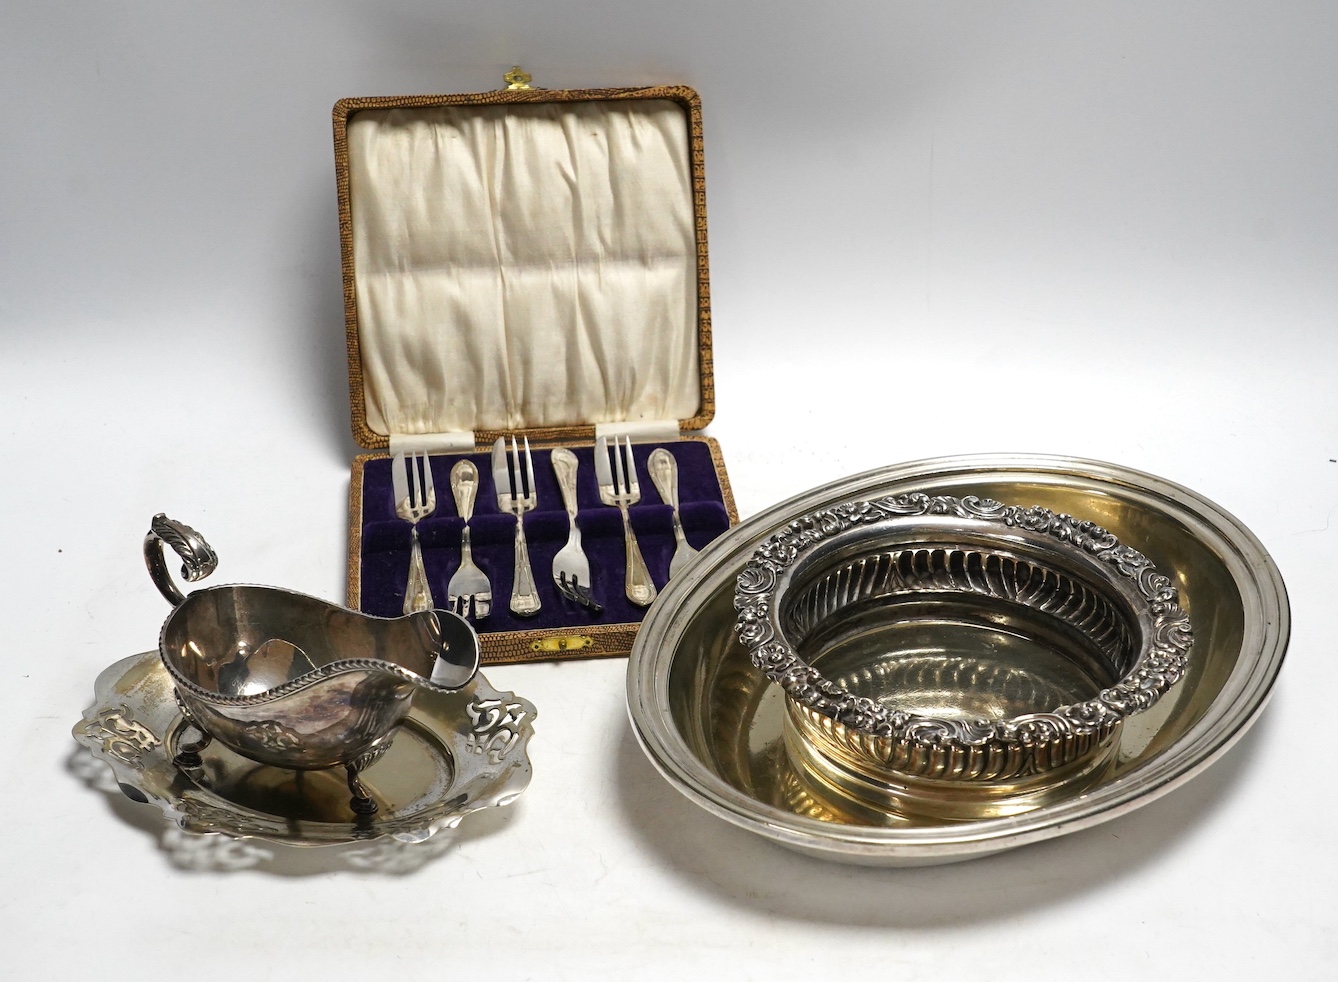 Assorted plated ware including a salver, a sauceboat and a cased set of forks